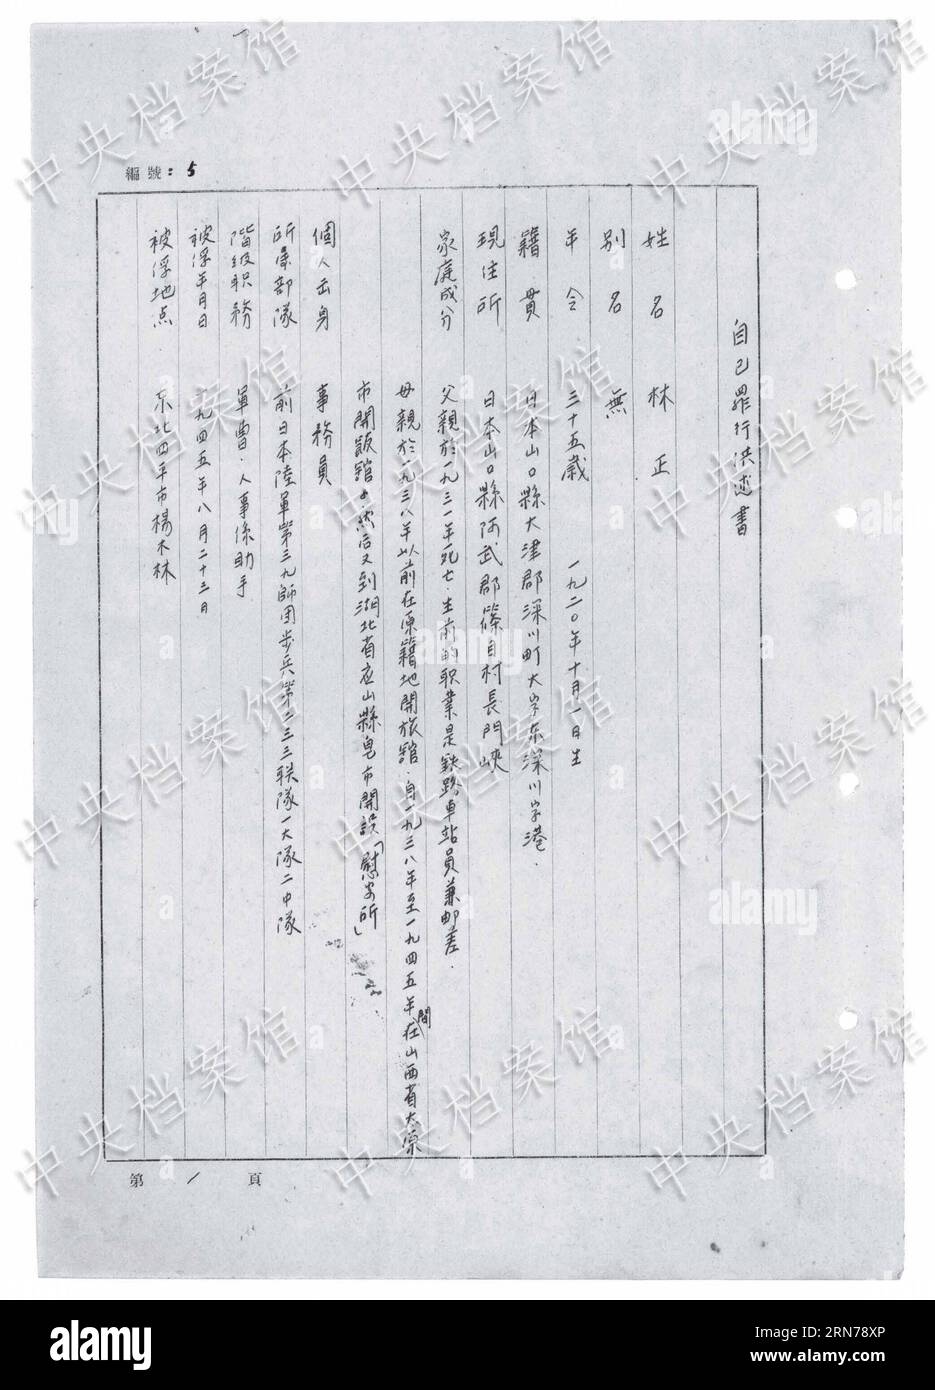 (150826) -- BEIJING, Aug. 26, 2015 () -- Photo released on Aug. 26, 2015 by the State Archives Administration of China on its website shows the Chinese version of an excerpt from Japanese war criminal Tadashi Hayashi s handwritten confession. The sixteenth in a series of 31 handwritten confessions from Japanese war criminals published online, the confession features Tadashi Hayashi, who was born in 1920. He joined the Japanese War of Aggression against China in 1941, and was captured in August 1945. Hayashi wrote that during one anatomy lesson for medical trainees, a military doctor injected a Stock Photo